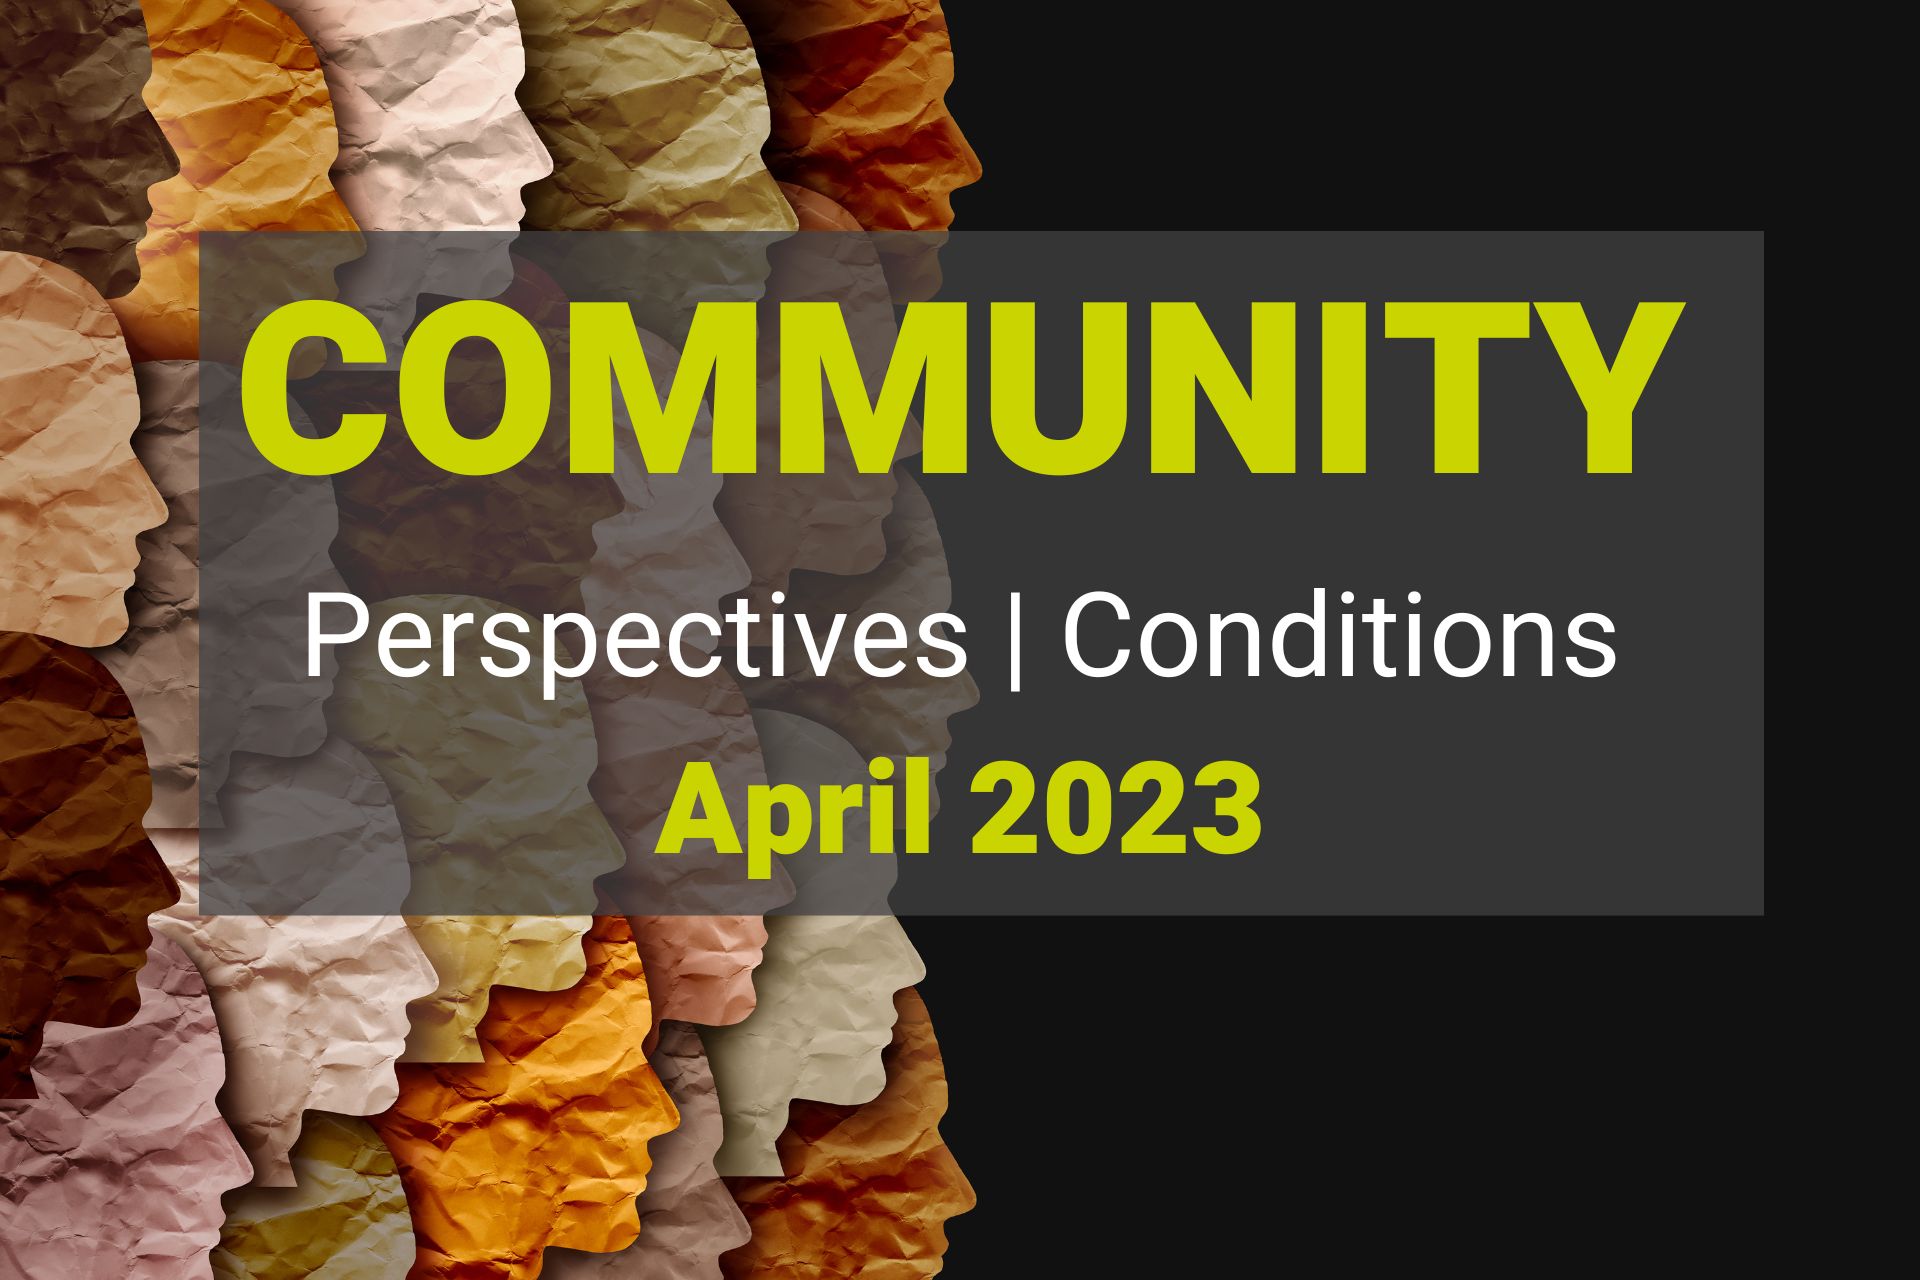 Community Perspectives & Conditions, April 2023 Federal Reserve Beige Book